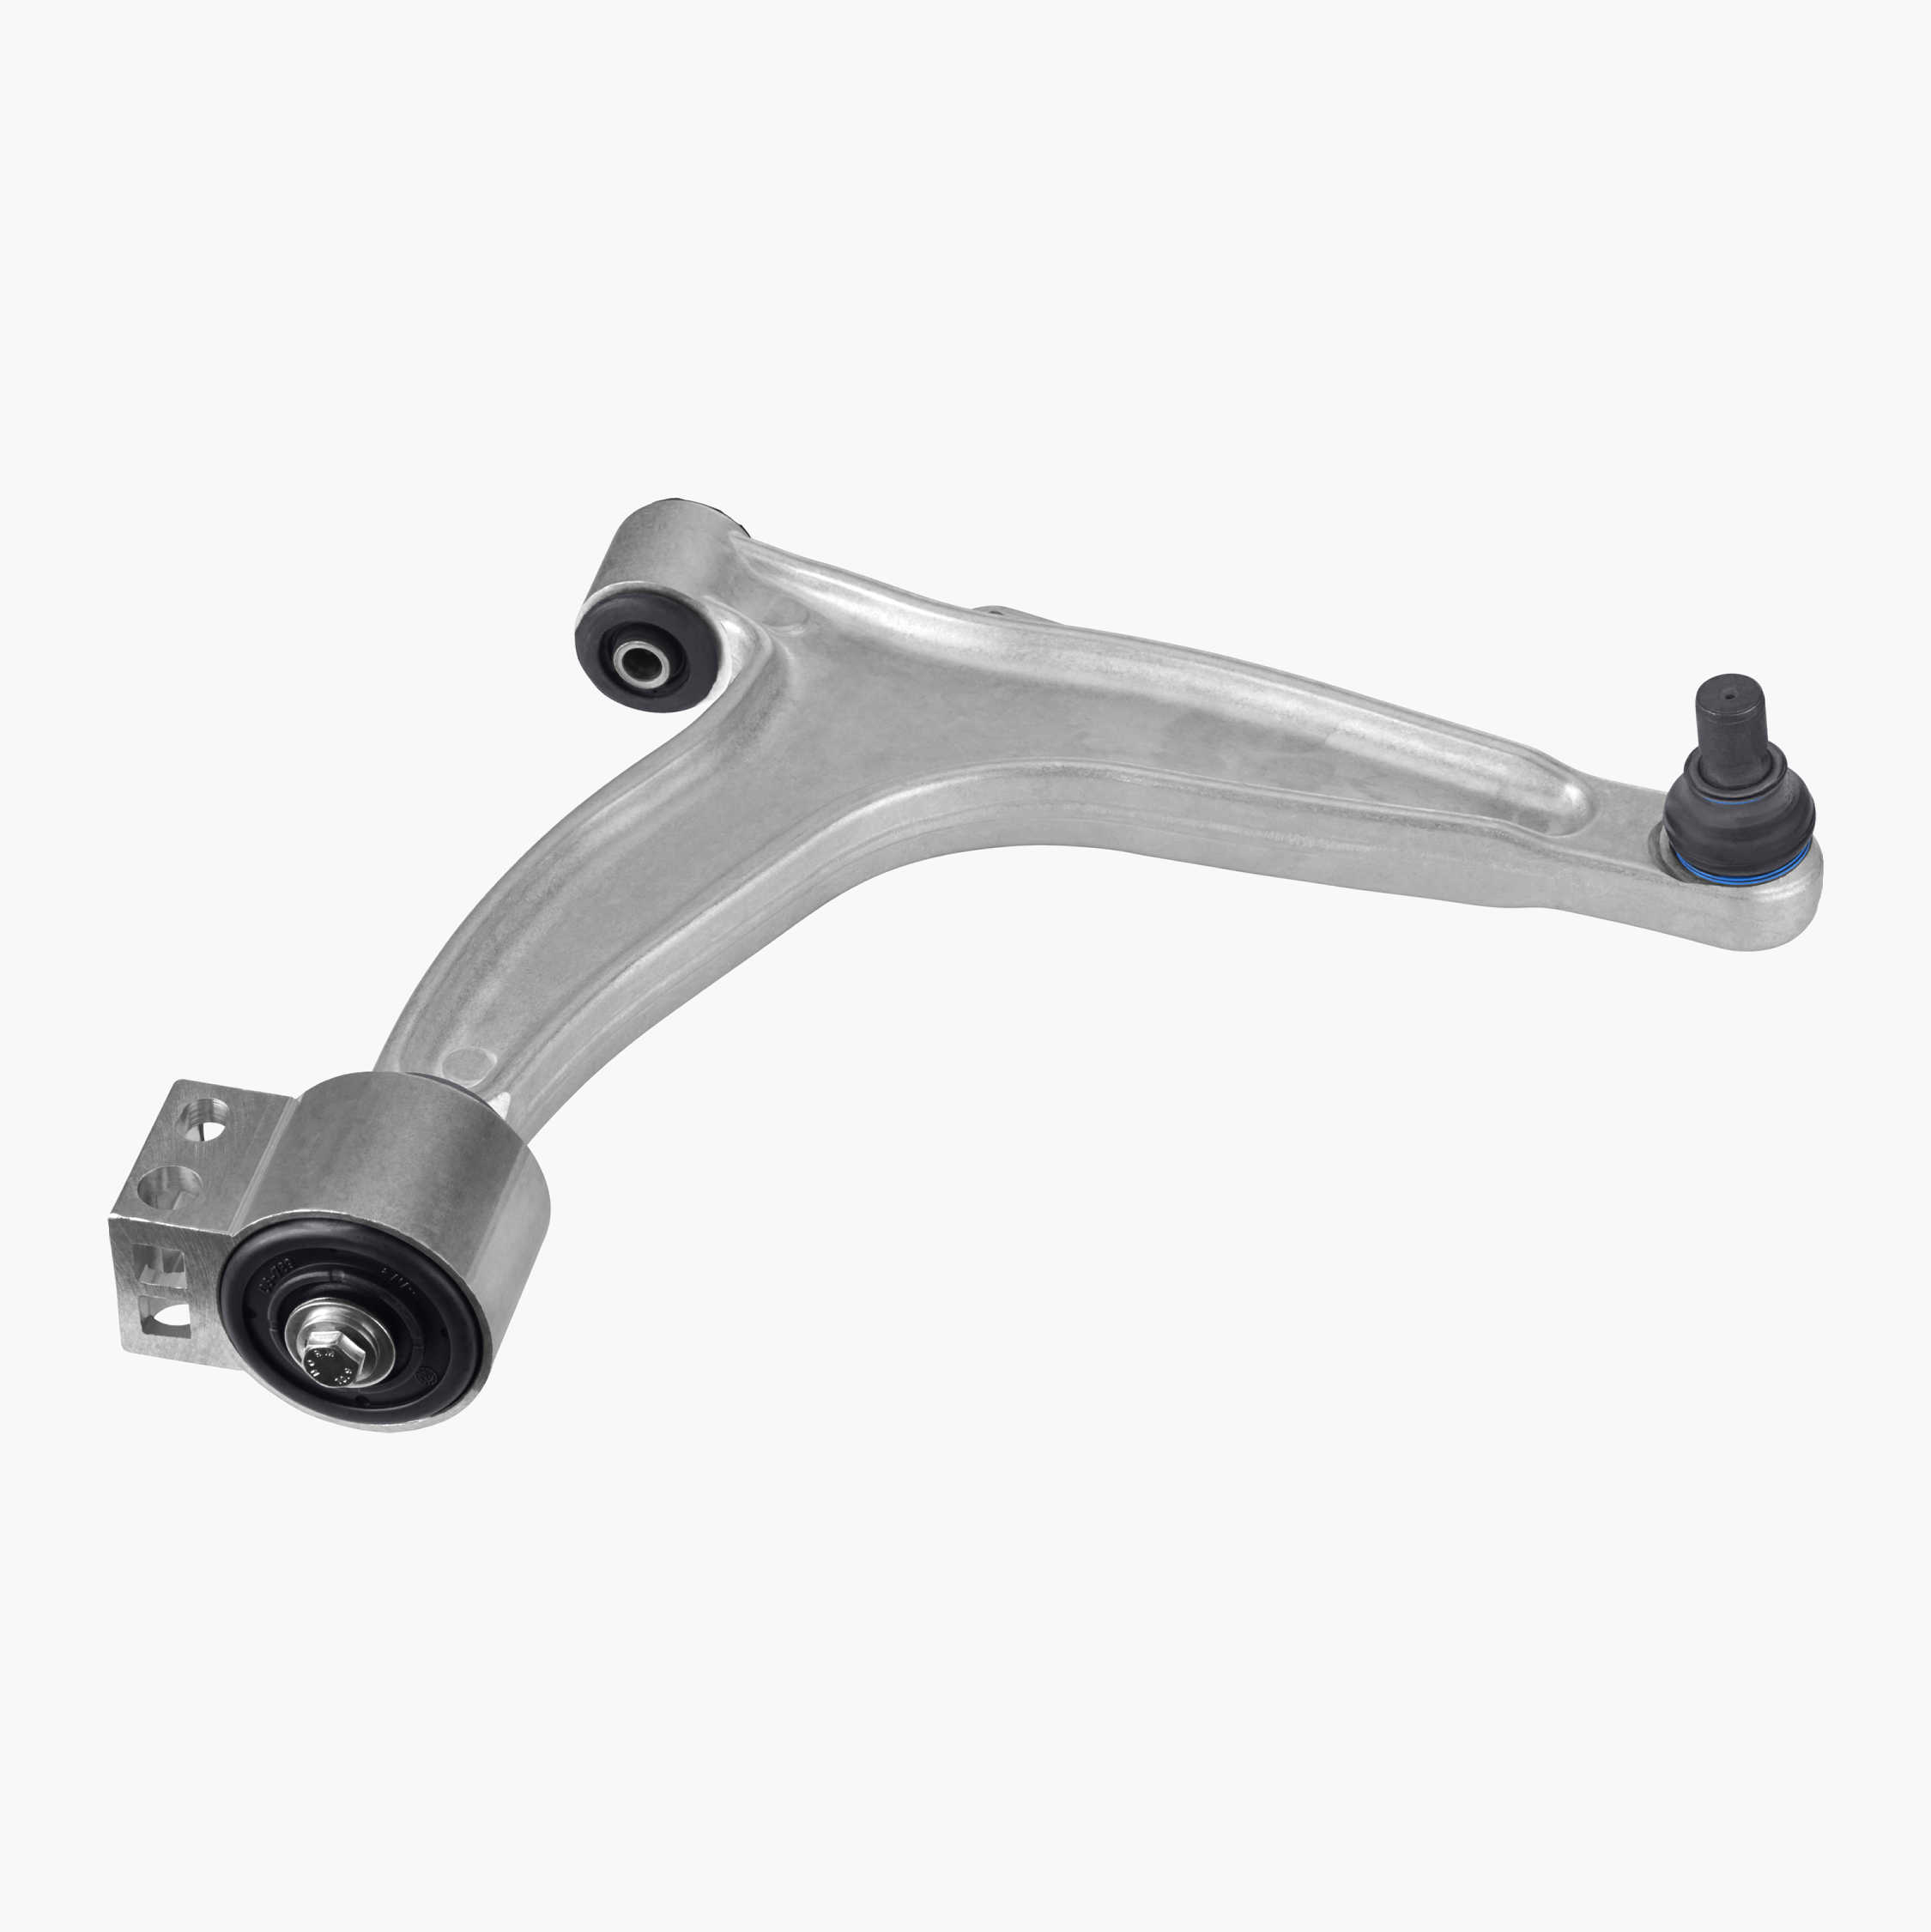 76%OFF!】 ロワアームバー AUTOEXE後部ロアアームバーBIANTE CCFFW CCEAW CC 3FW CCEFW MBK440  AUTOEXE Rear Lower Arm Bar for BIANTE CC3FW